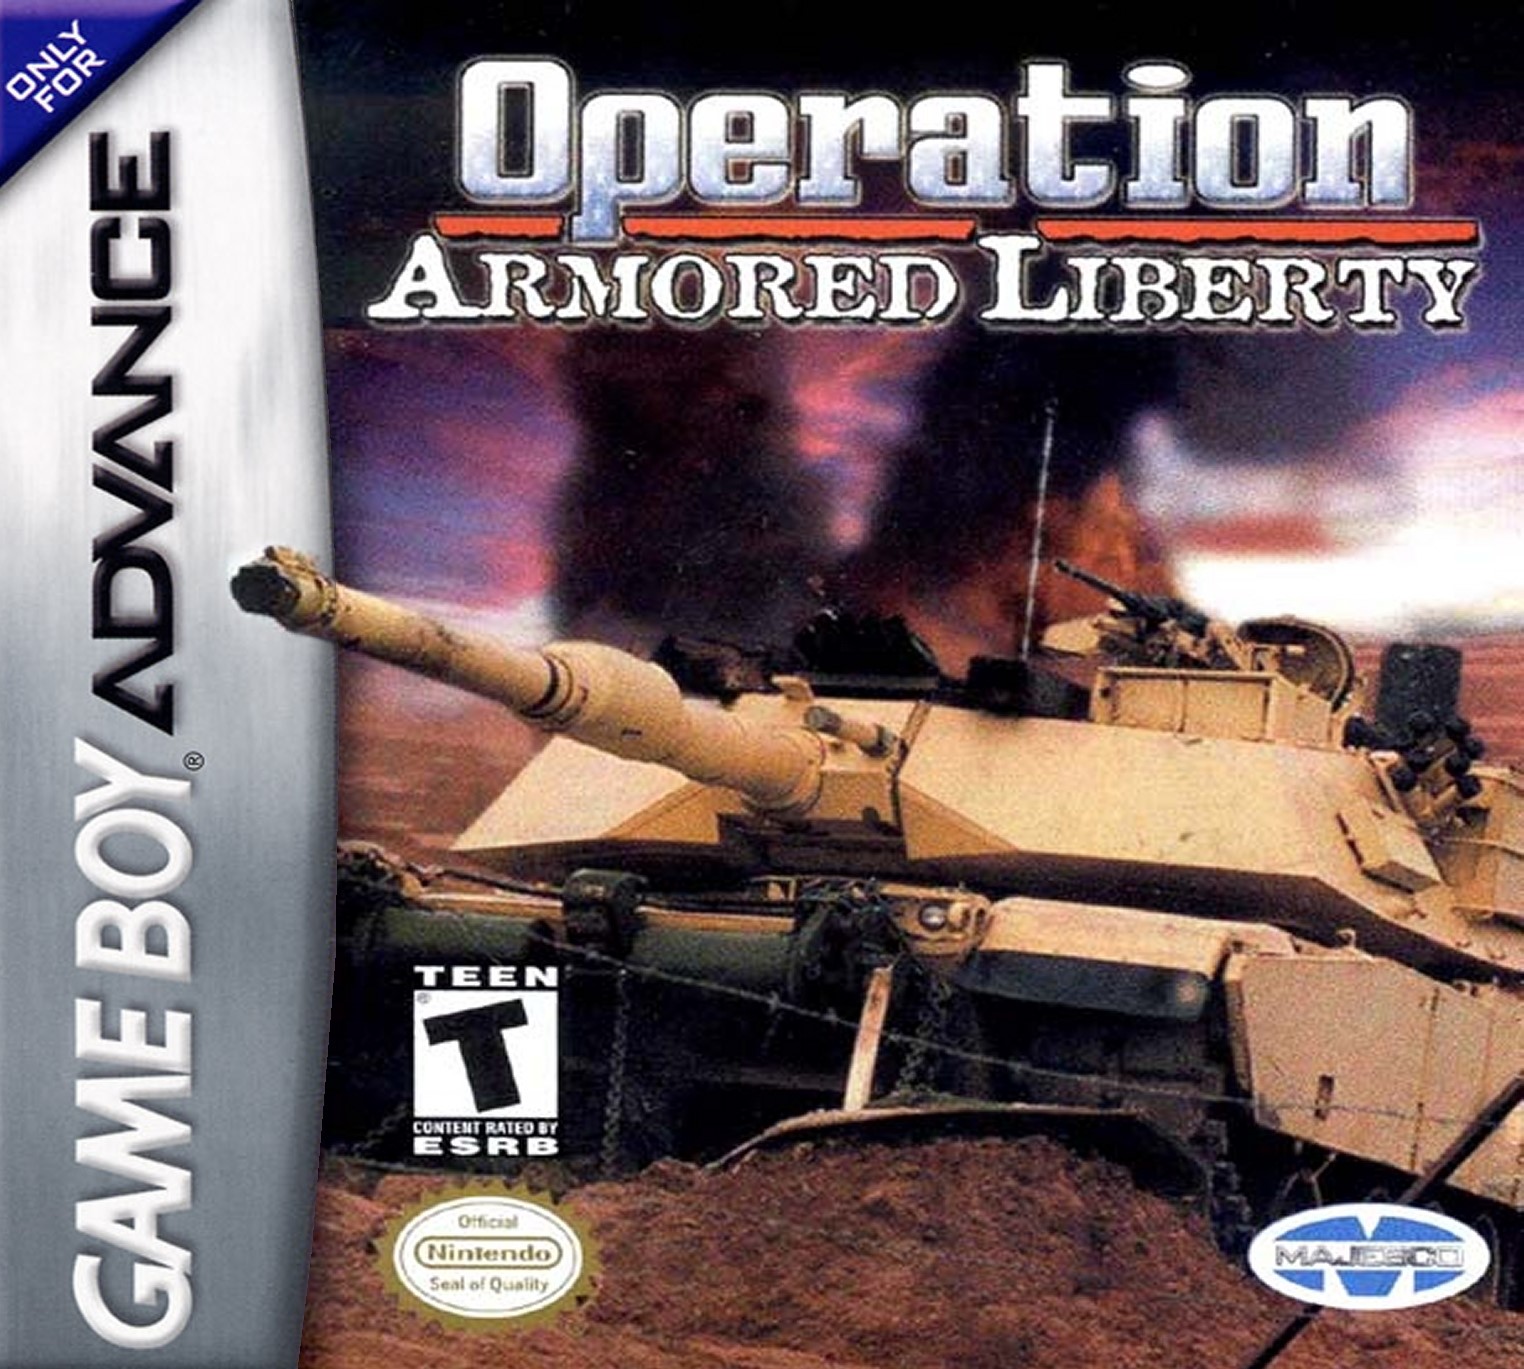 'Operation: Armored Liberty'